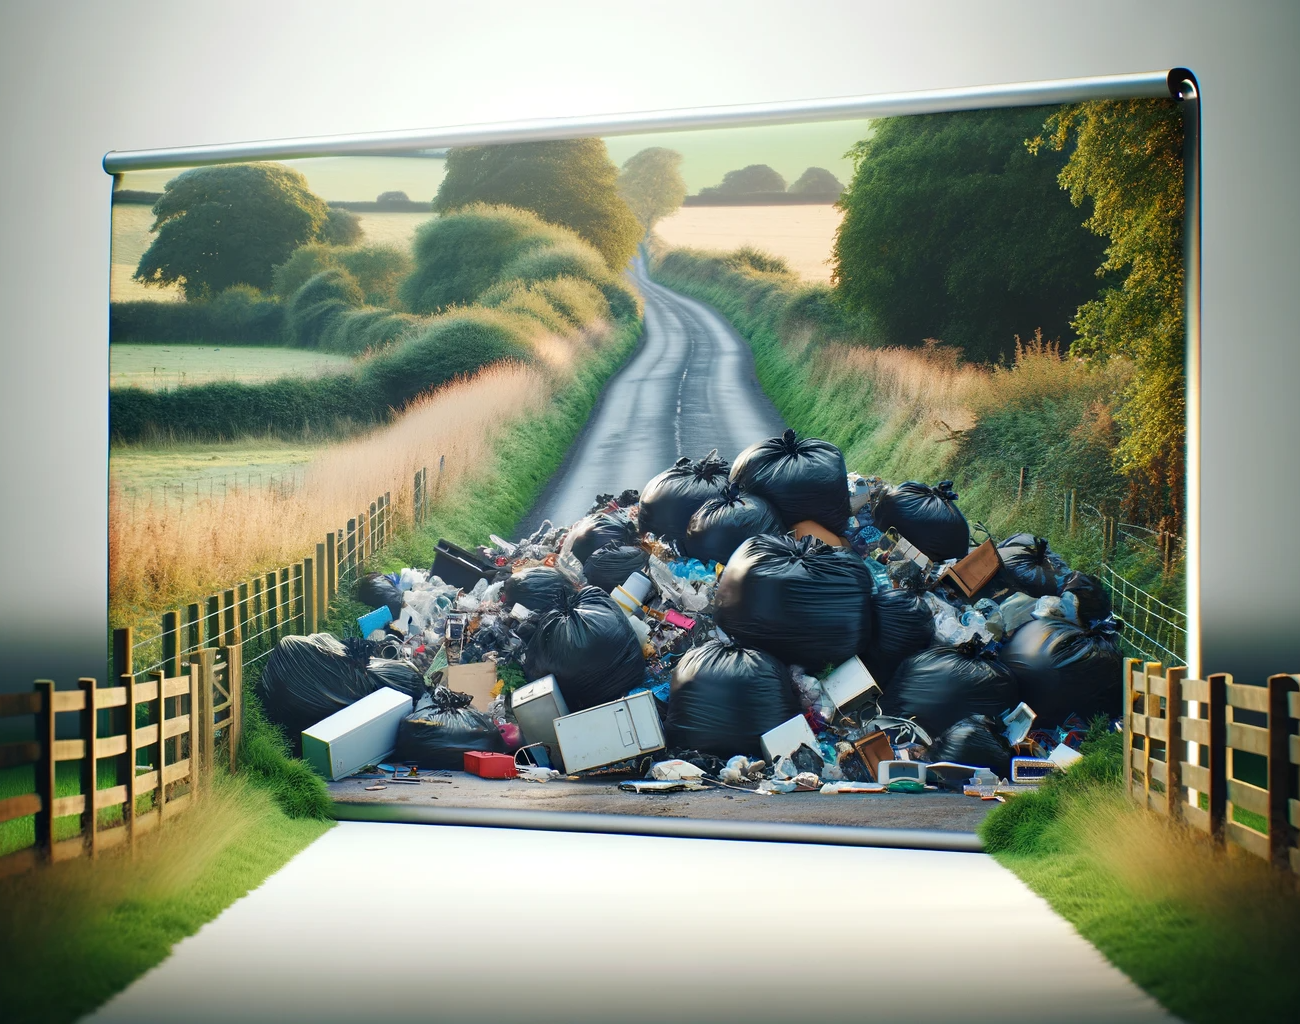 A pile of rubbish in a rural area, a result of fly-tipping. Private investigation Private Investigator.